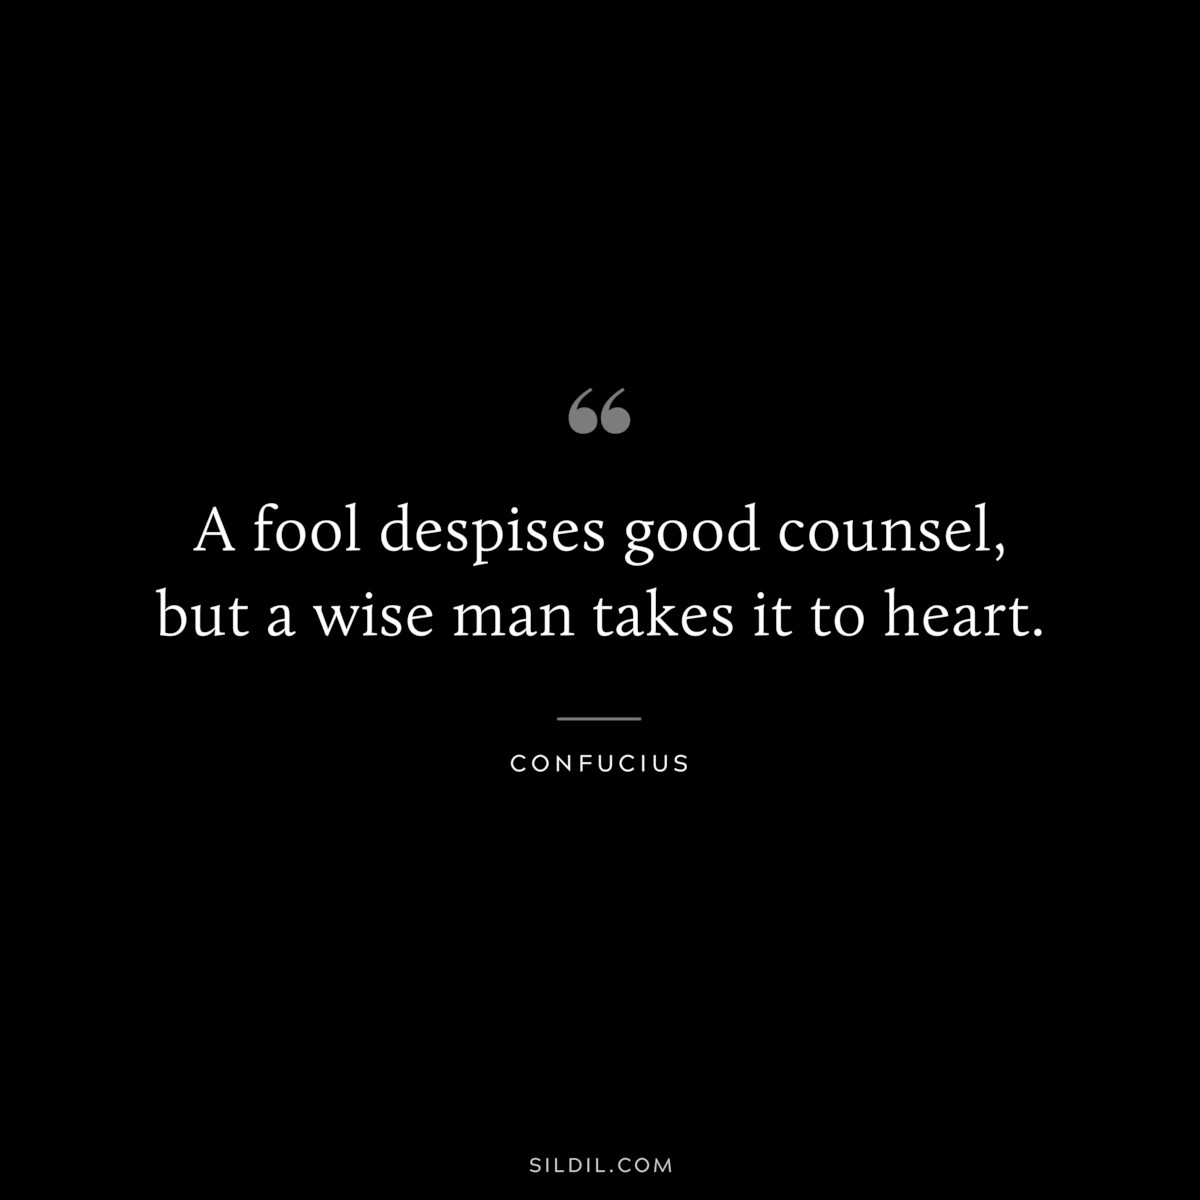 A fool despises good counsel, but a wise man takes it to heart. ― Confucius